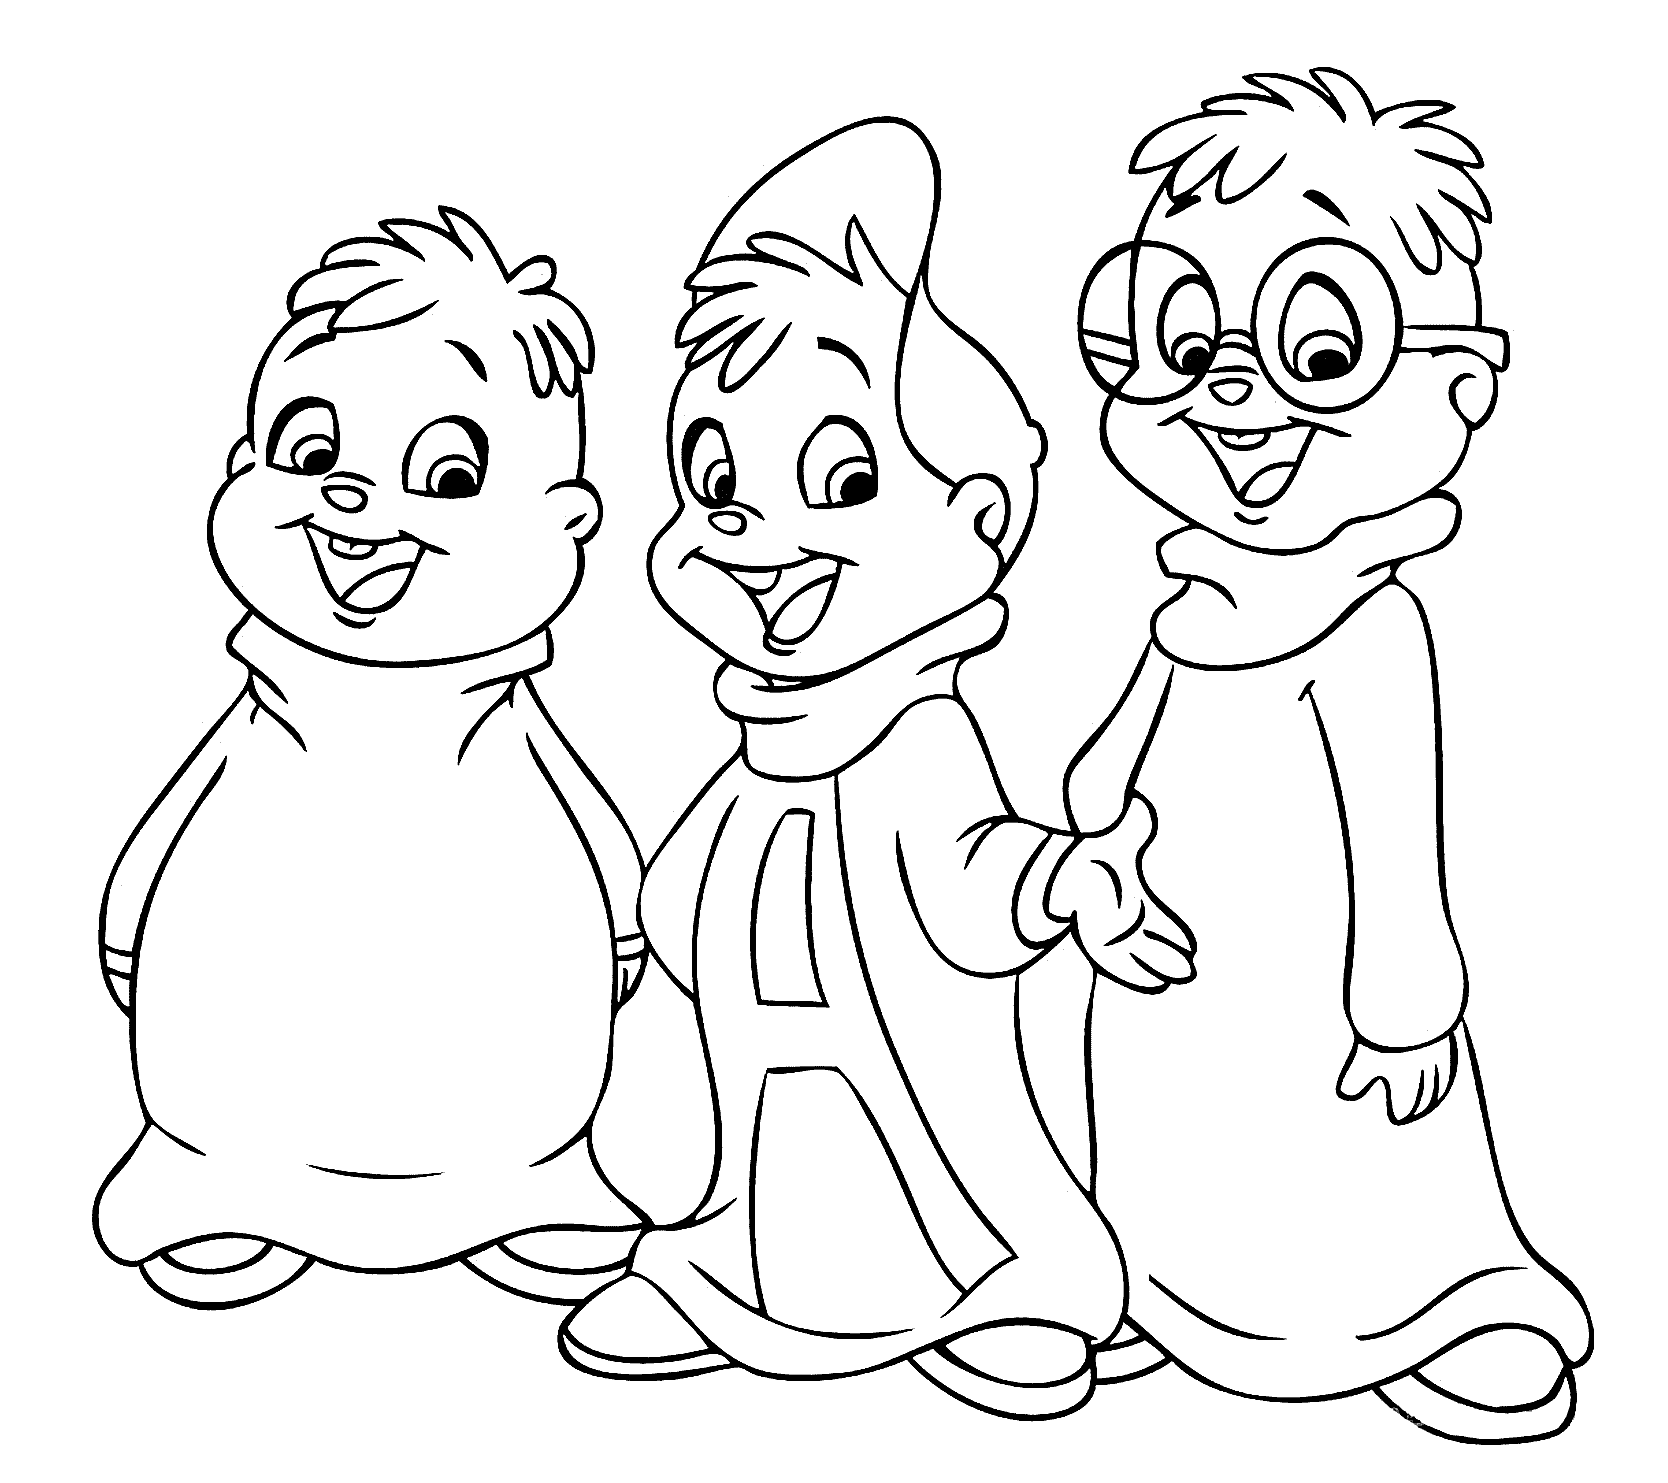 Free Printable Coloring Pages Alvin And The Chipmunks   Coloring Home